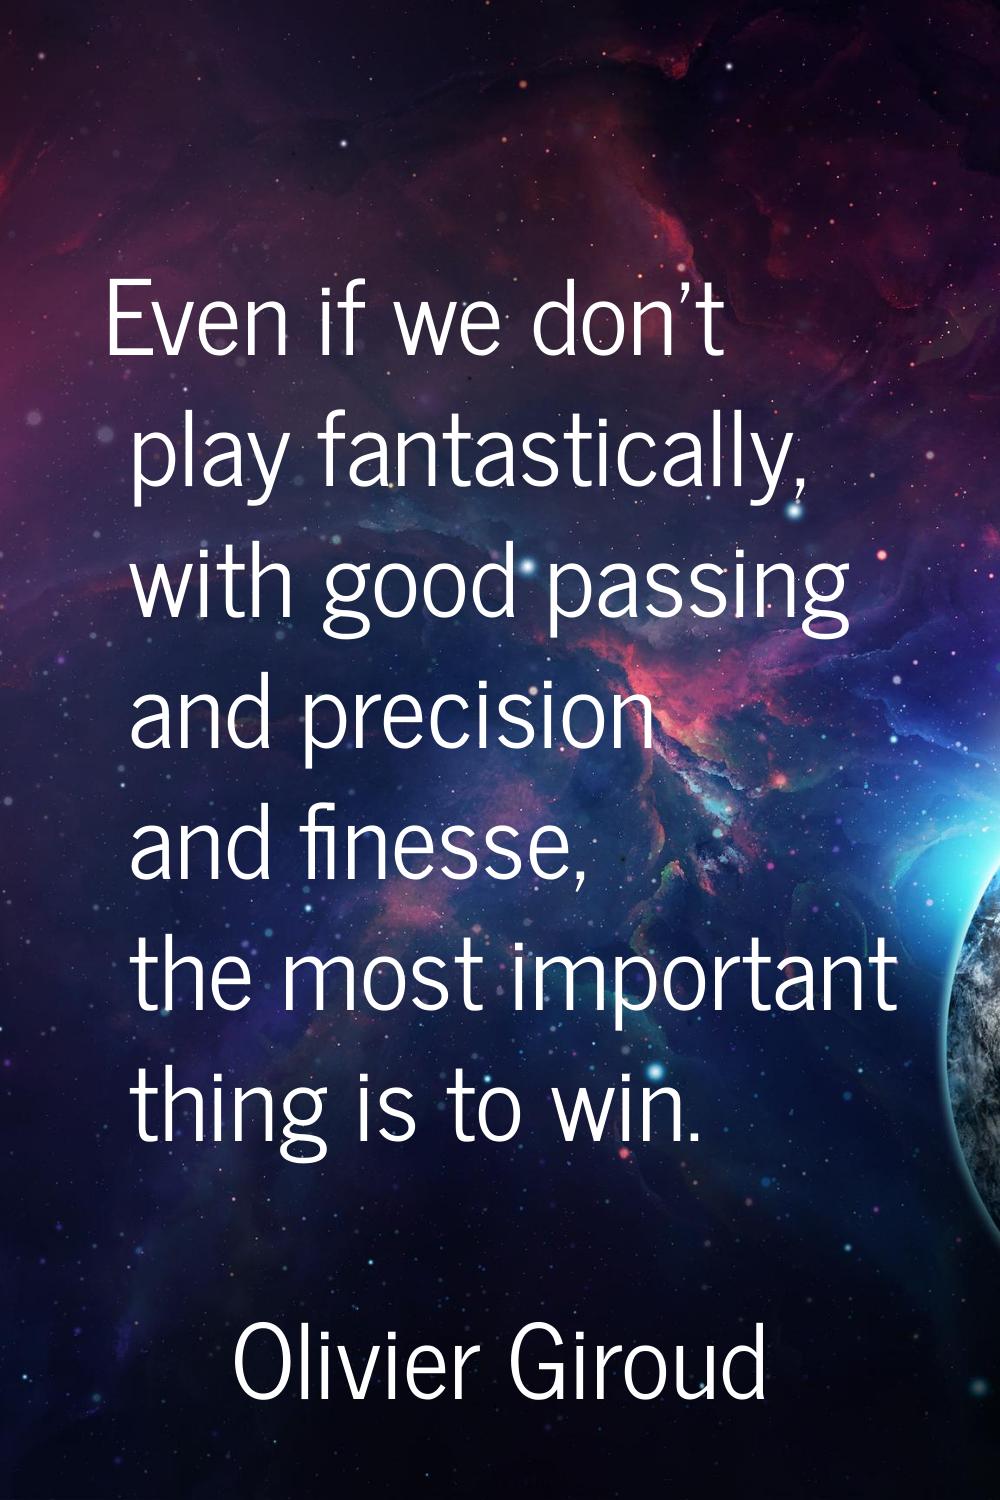 Even if we don't play fantastically, with good passing and precision and finesse, the most importan